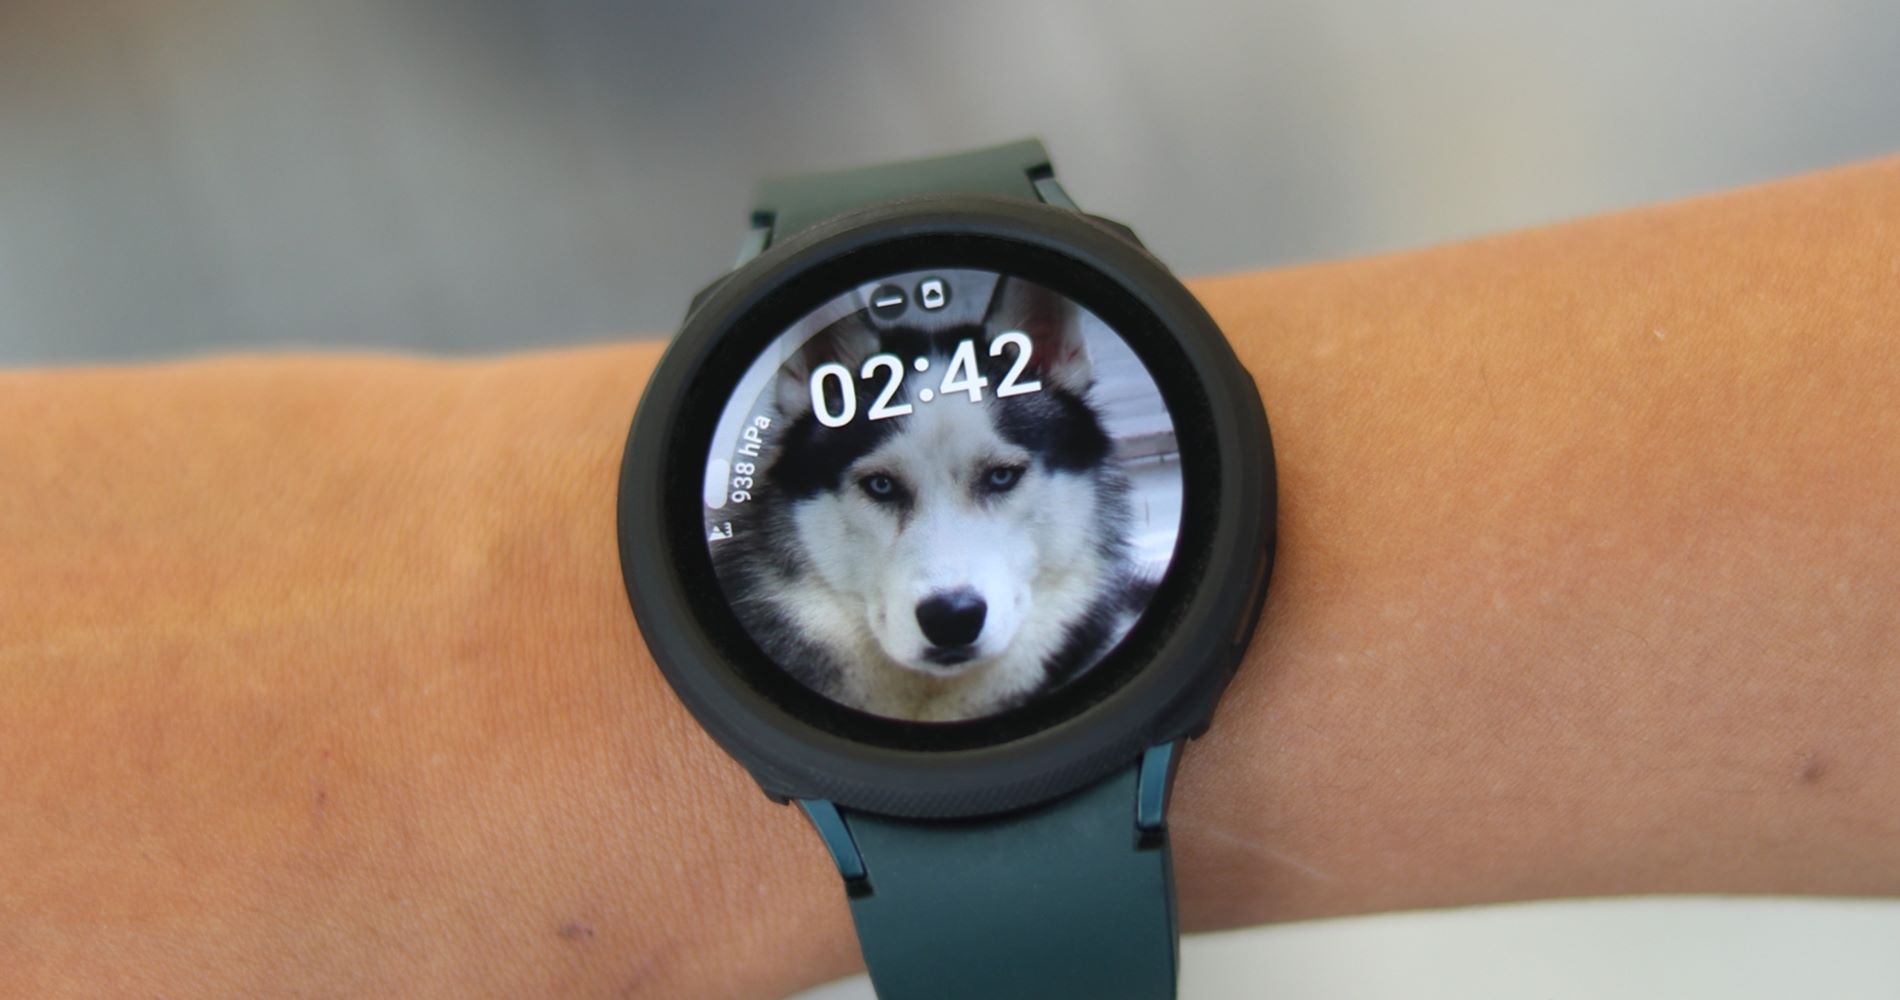 How To Change Watch Face On Galaxy Watch 4